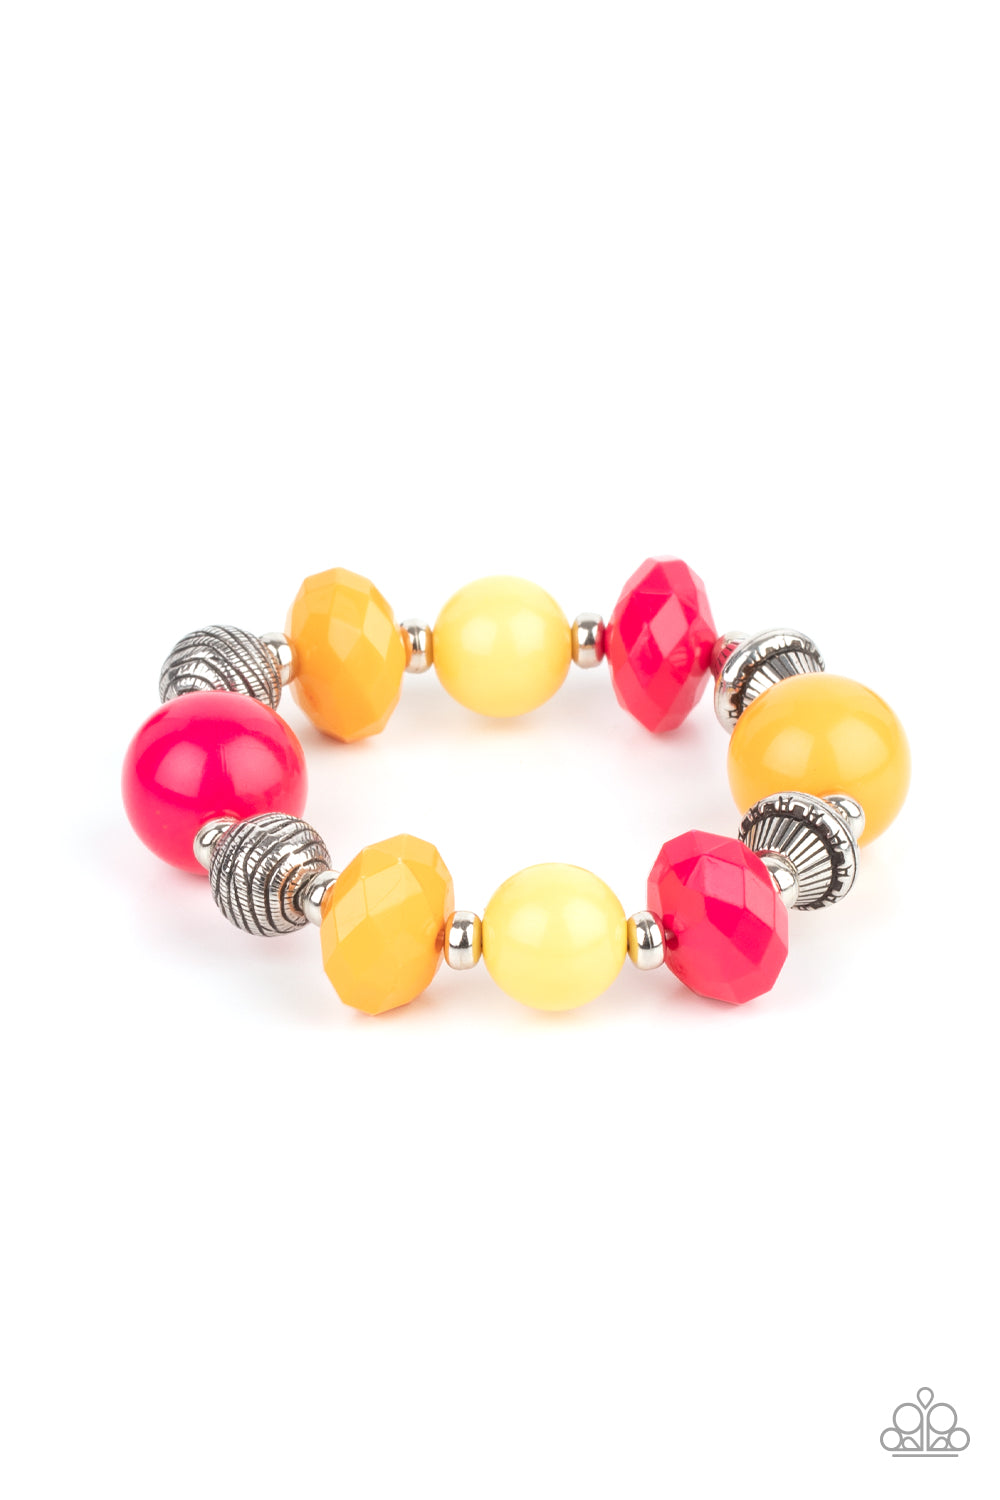 Day Trip Discovery - Multi Color Bracelet - Paparazzi Accessories